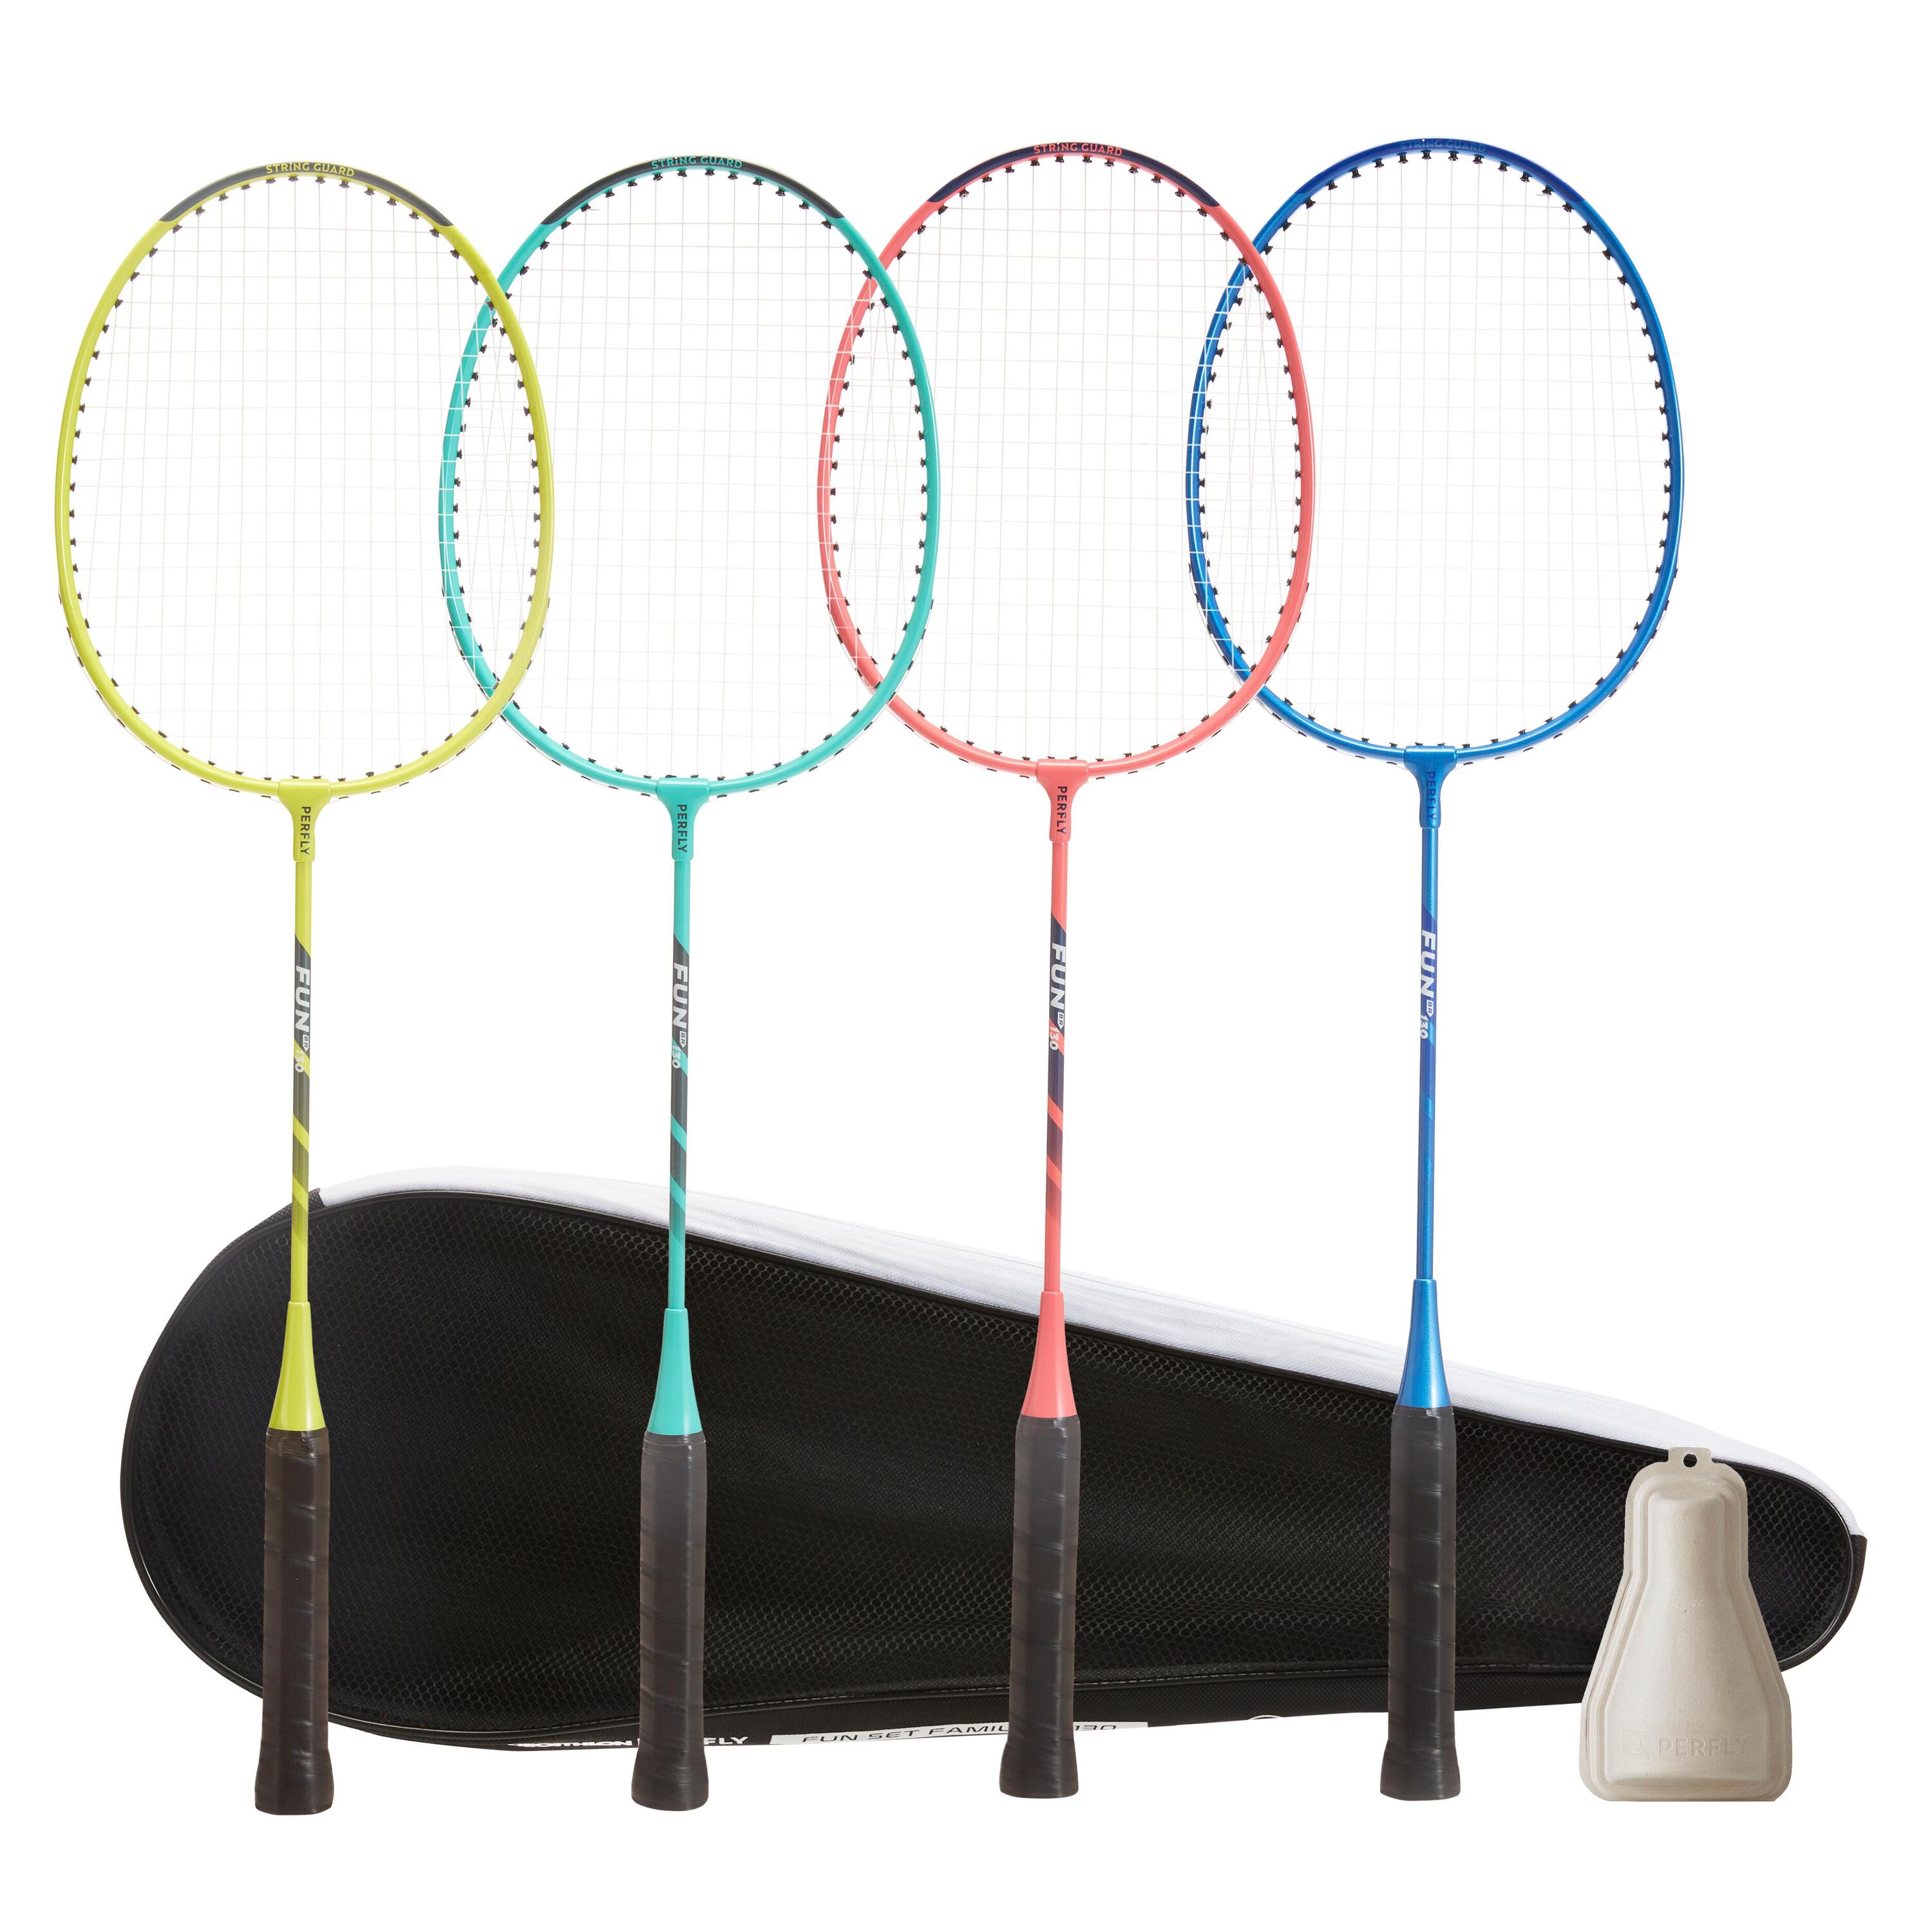 PERFLY Fun BR130 Set family with a set of 4 adult badminton rackets